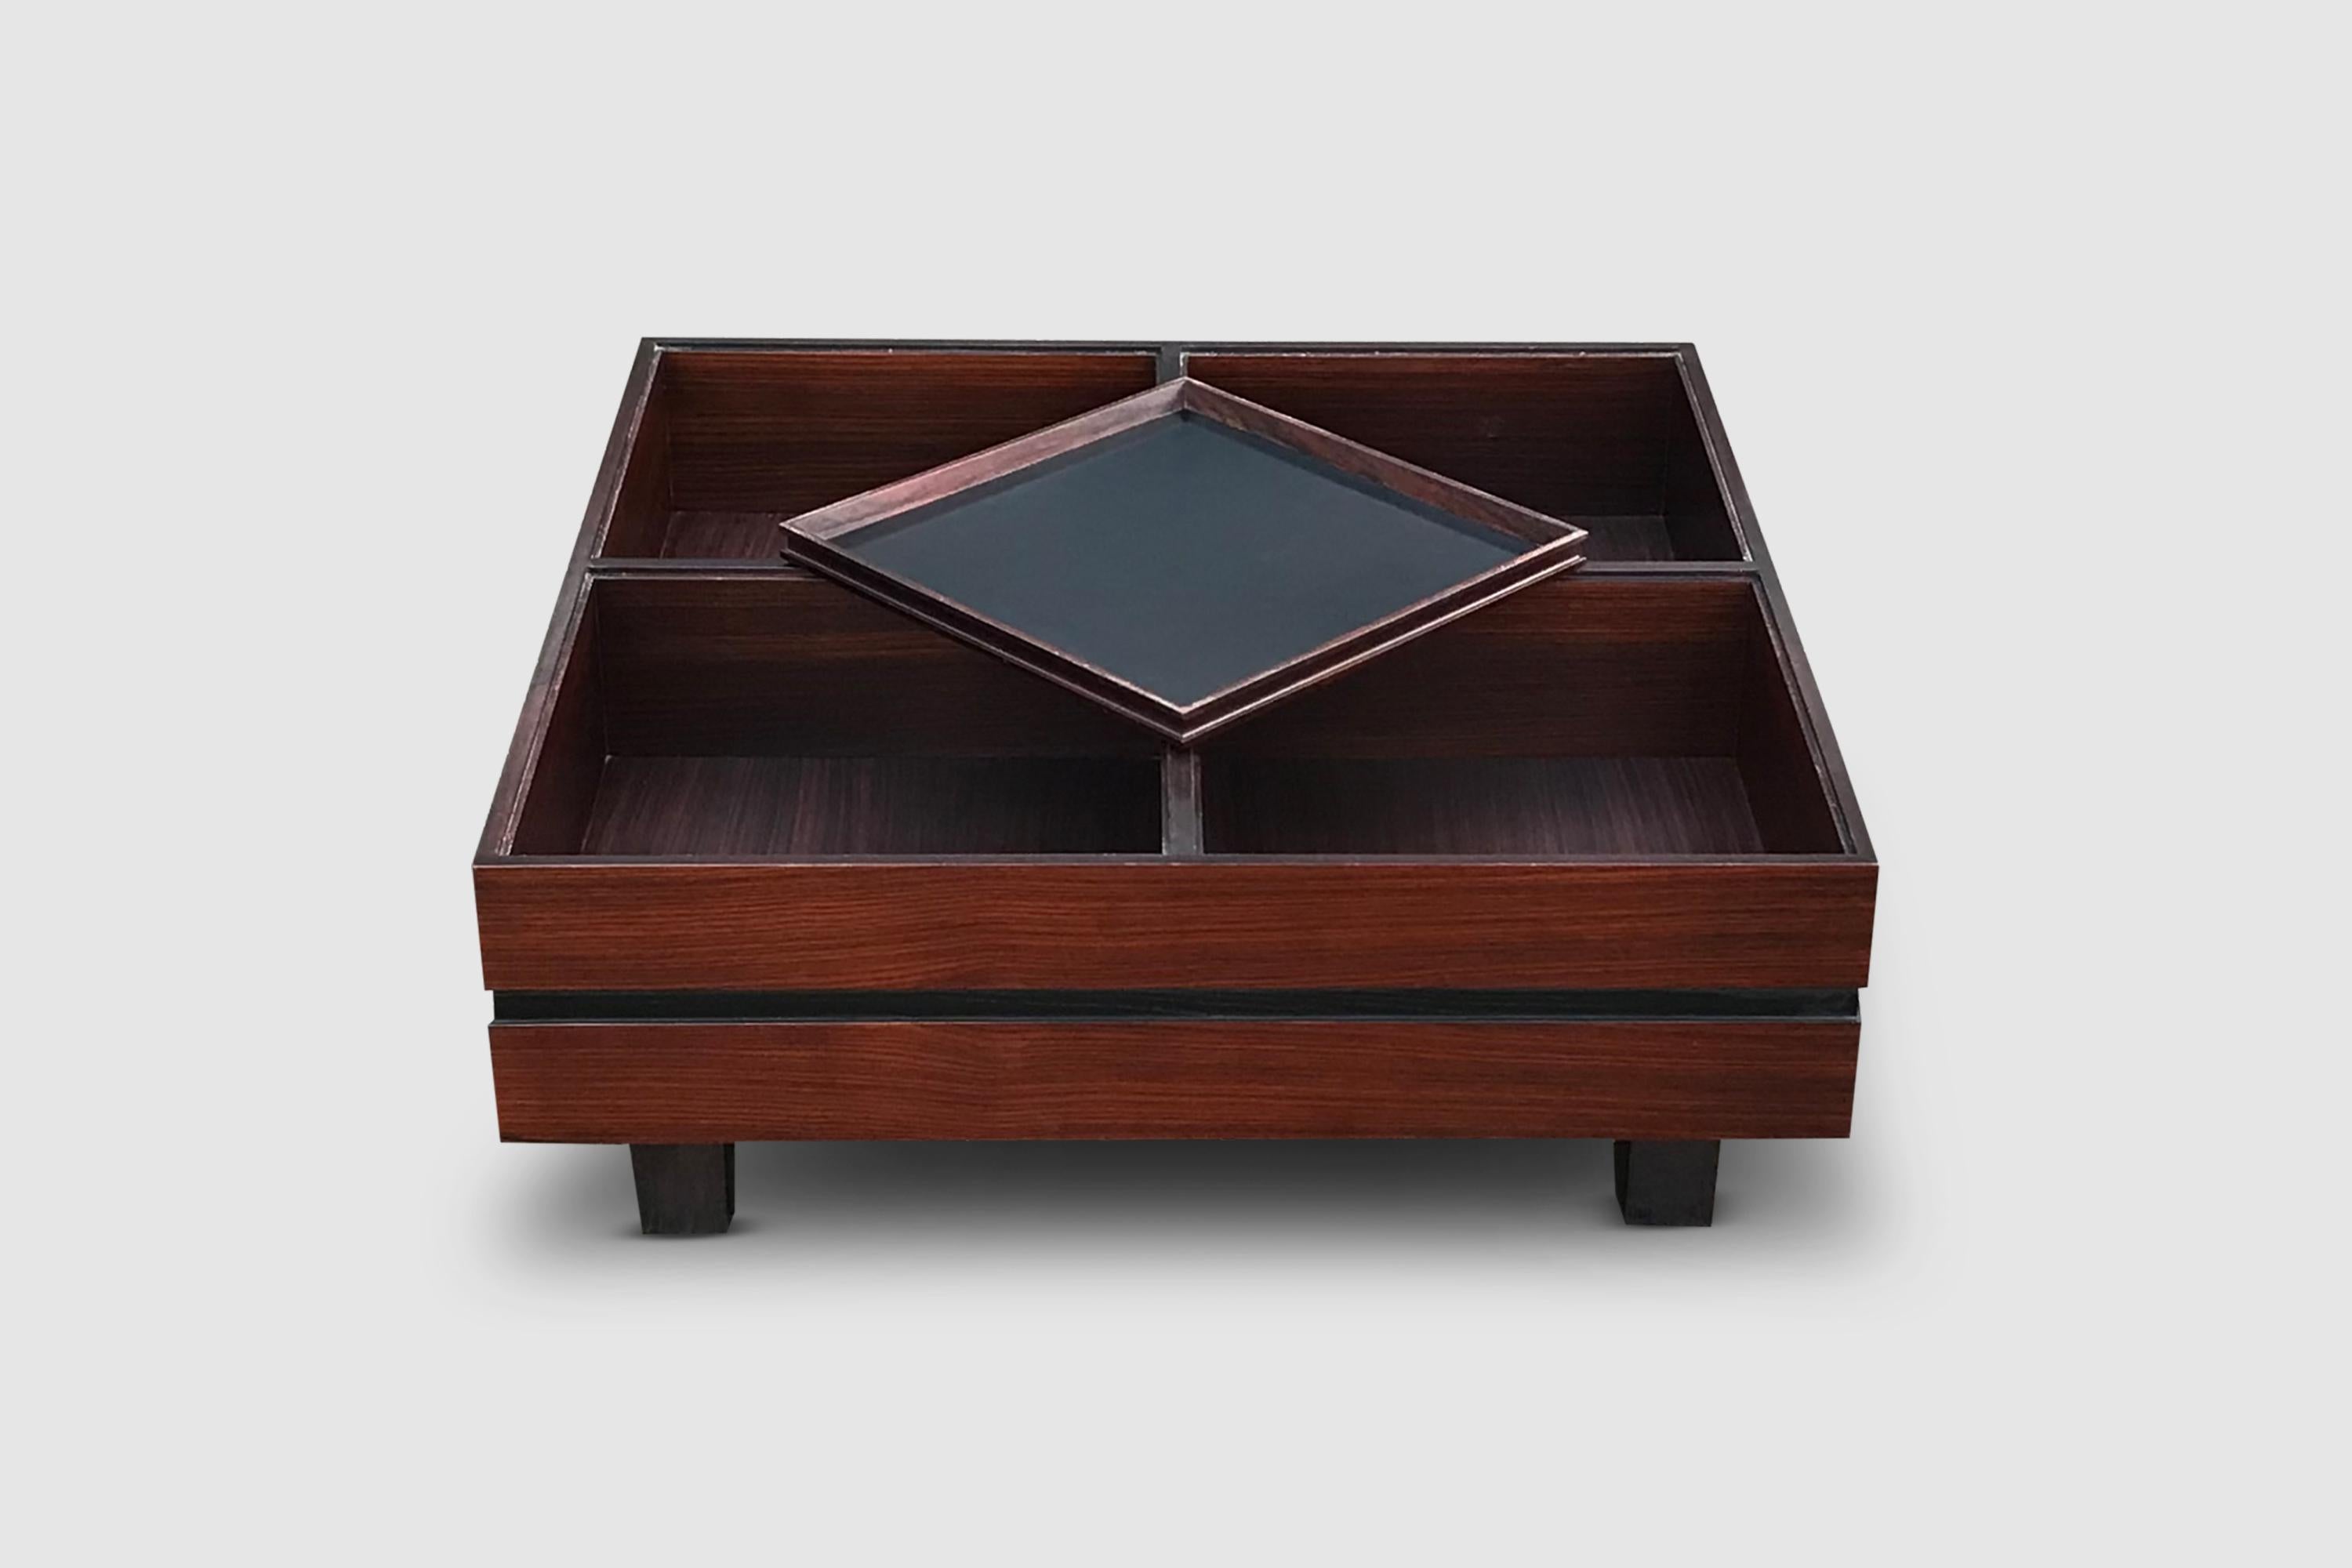 20th Century Compartmented Teak Coffee Table by Carlo Hauner for Forma Italy 1960s For Sale